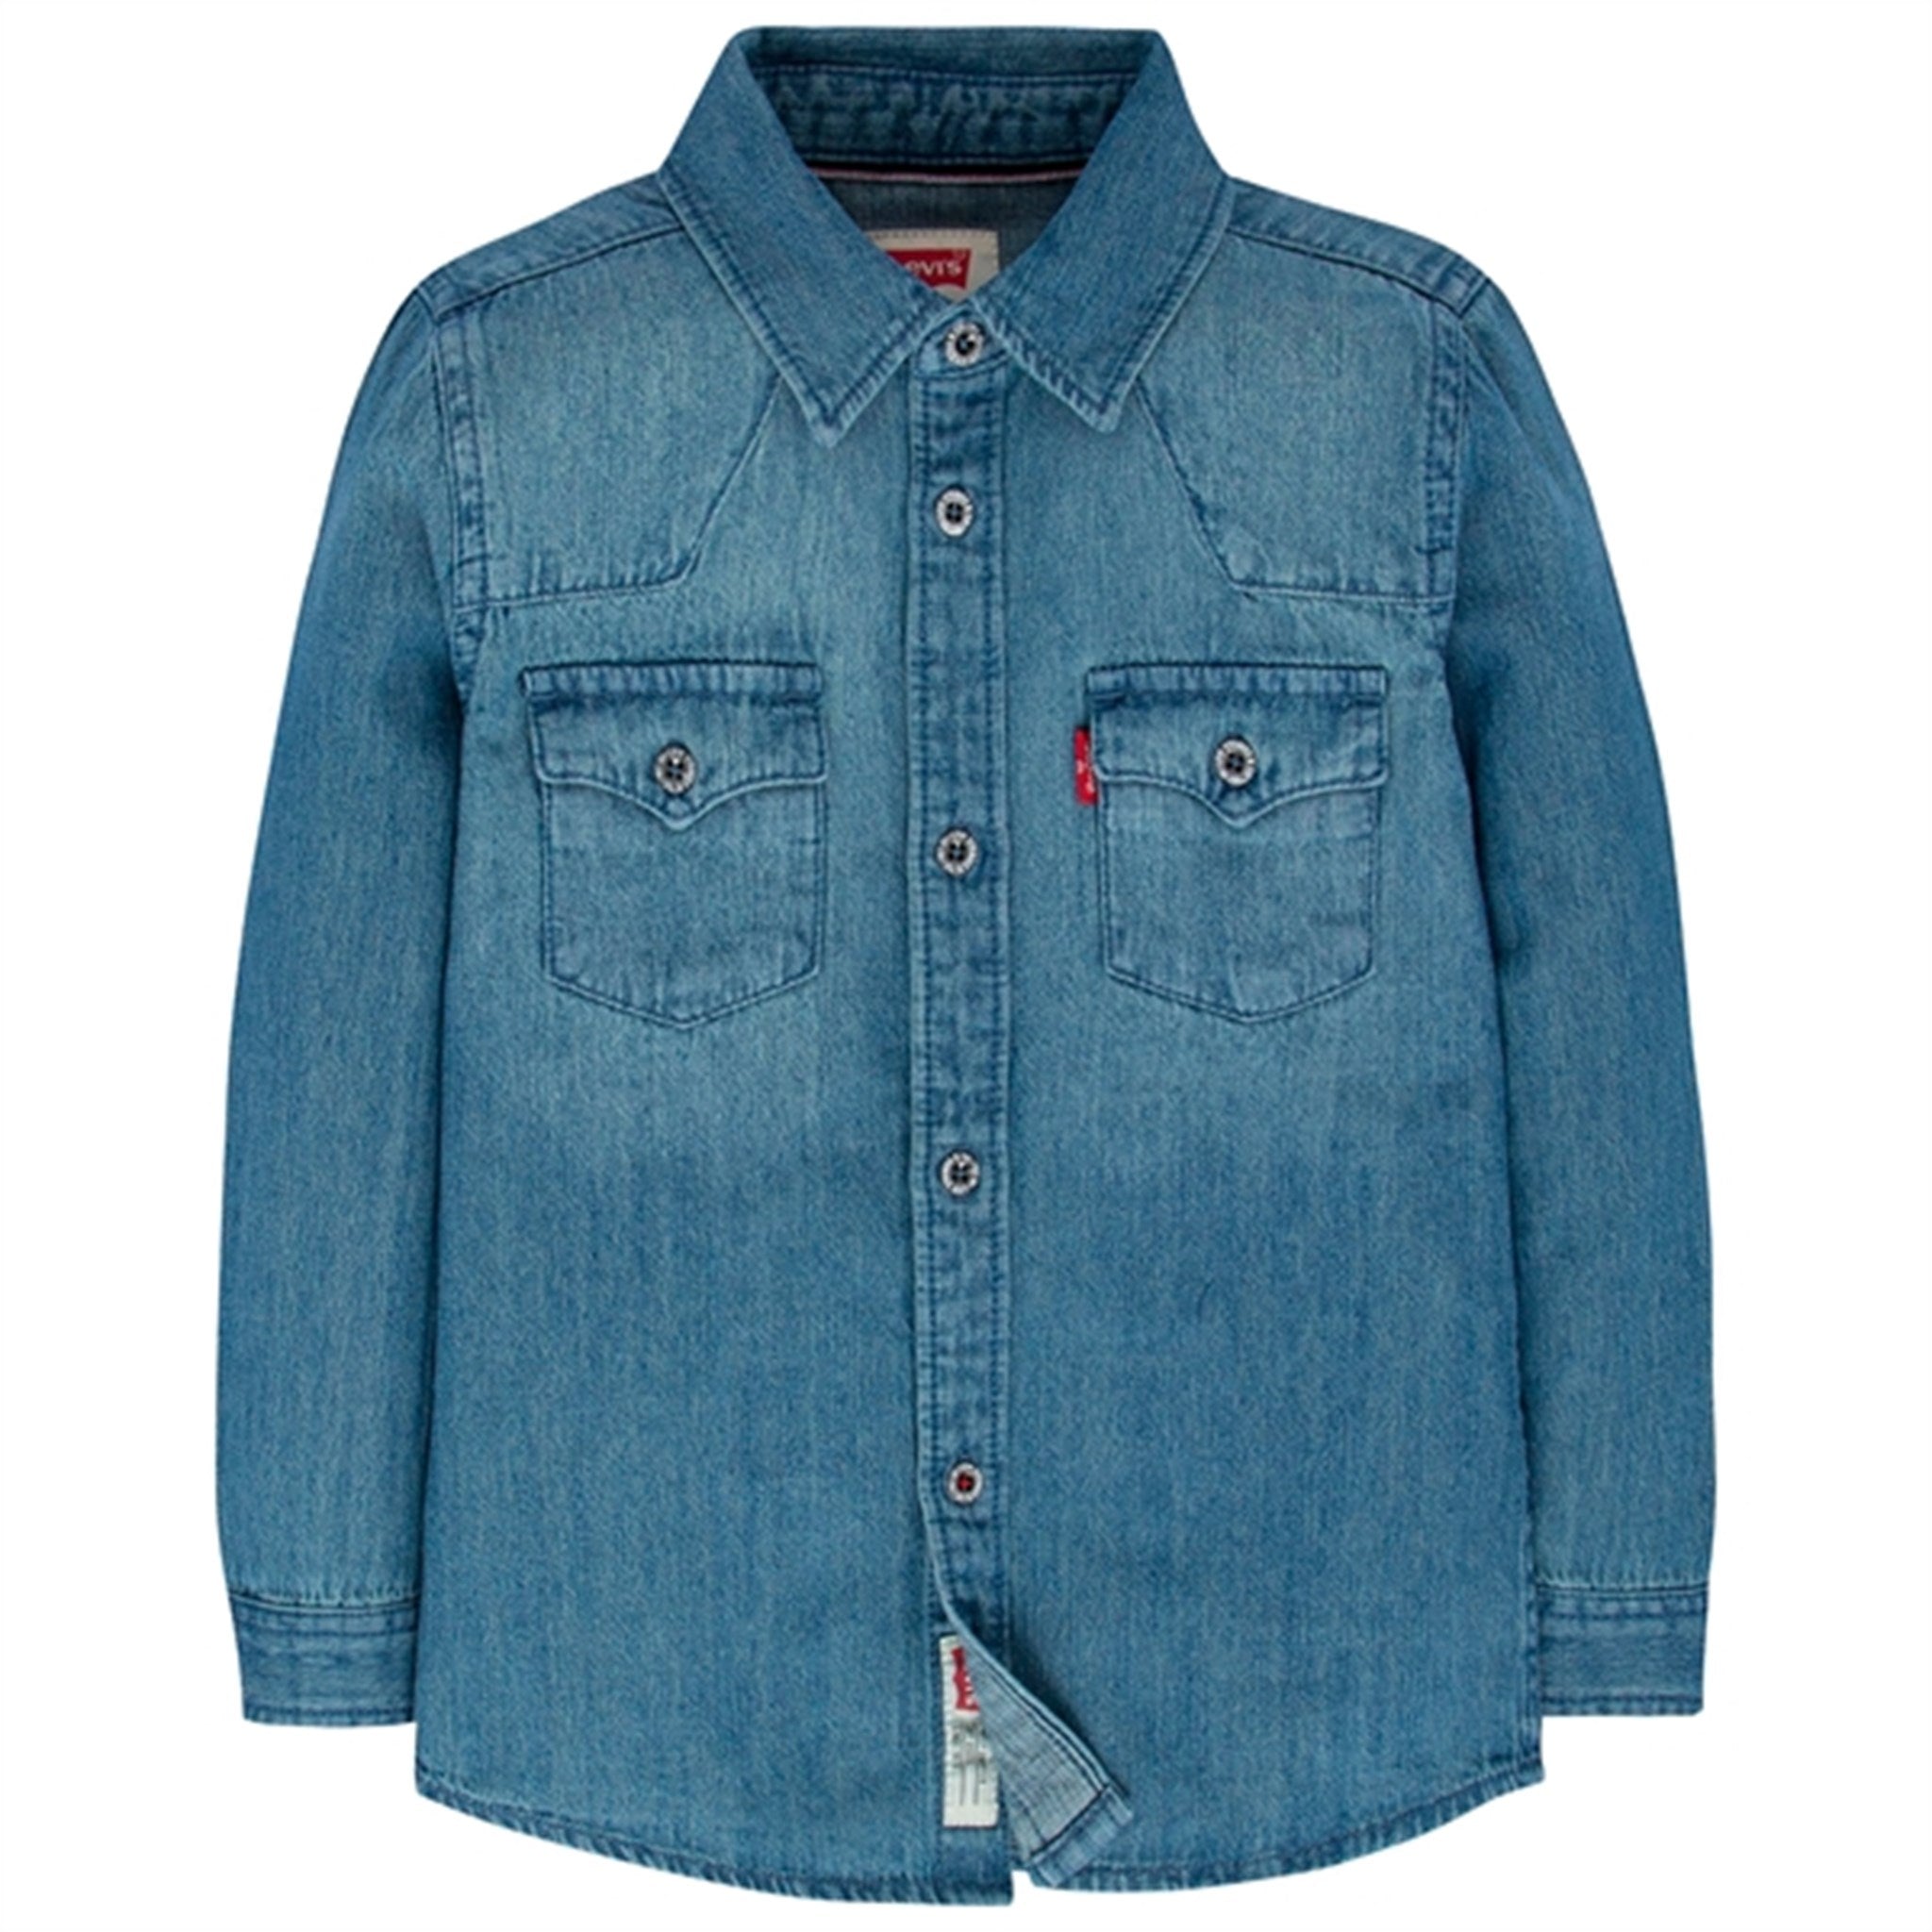 Levi's Barstow Western Shirt Turquoise